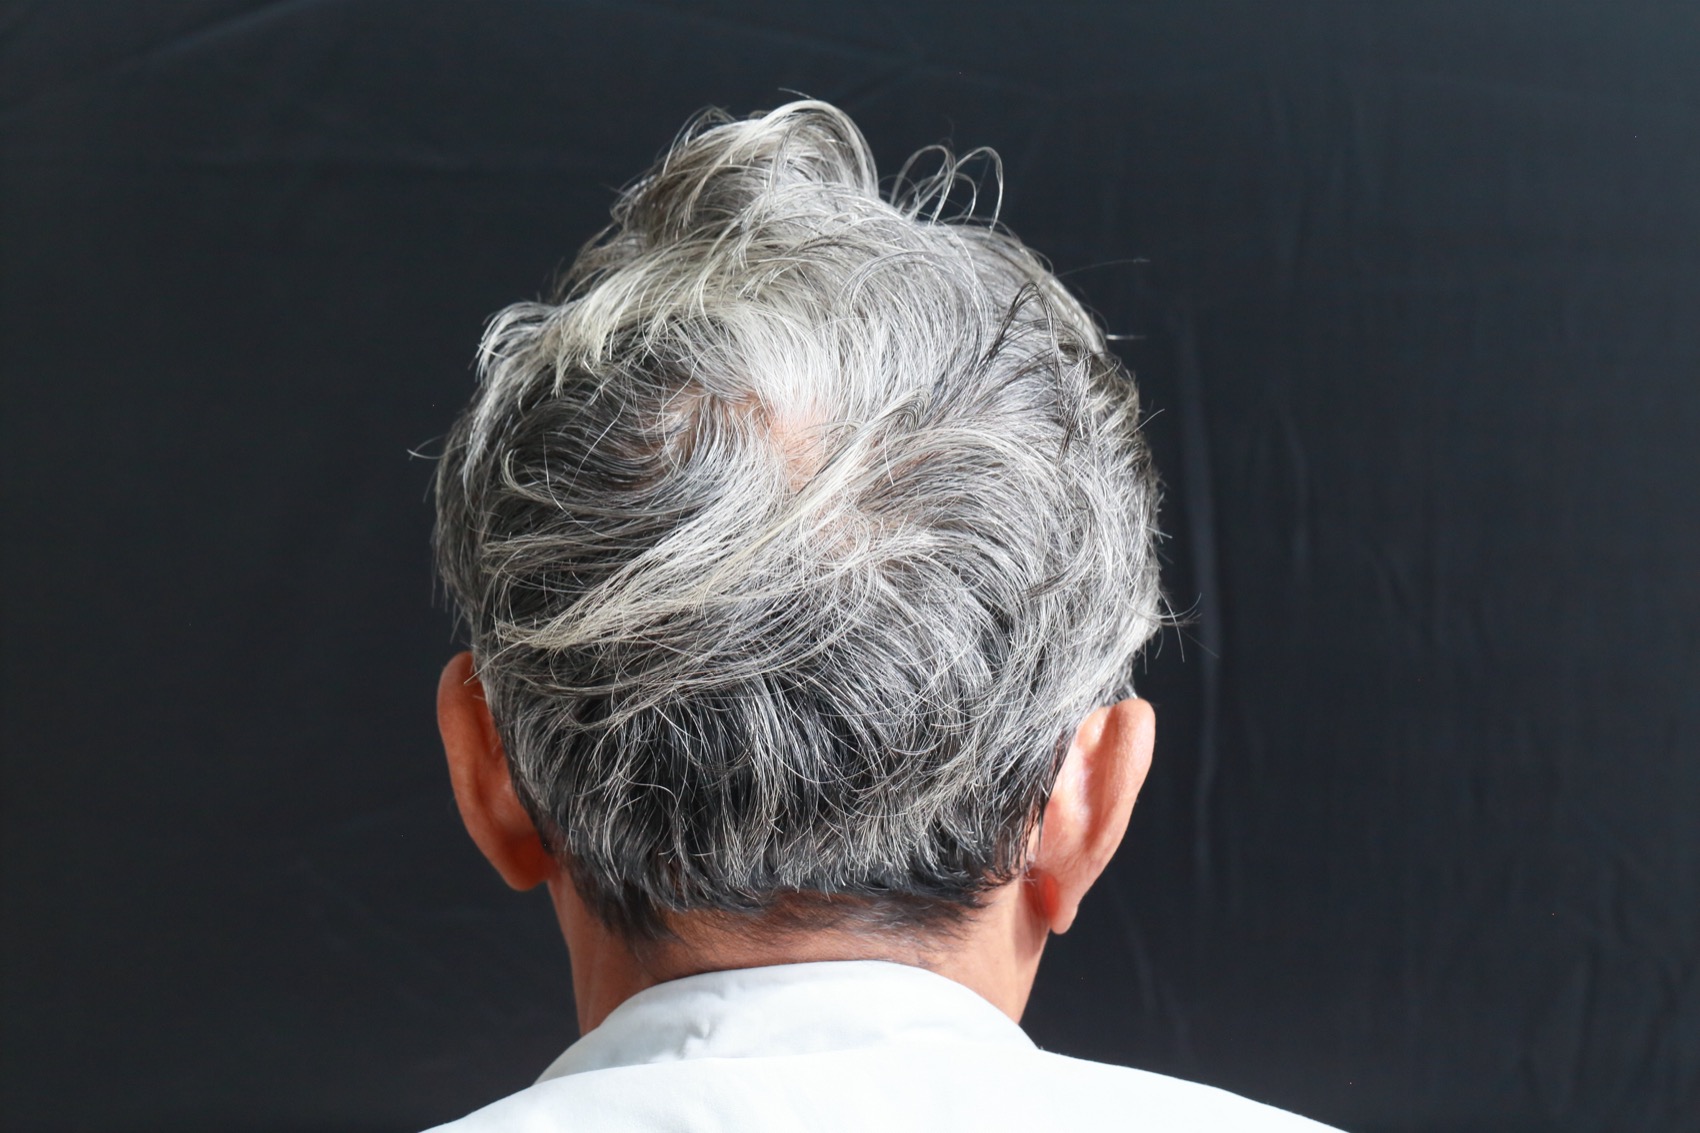 looking at the back of an old persons head filled with mostly white and some grey hair, against a black background